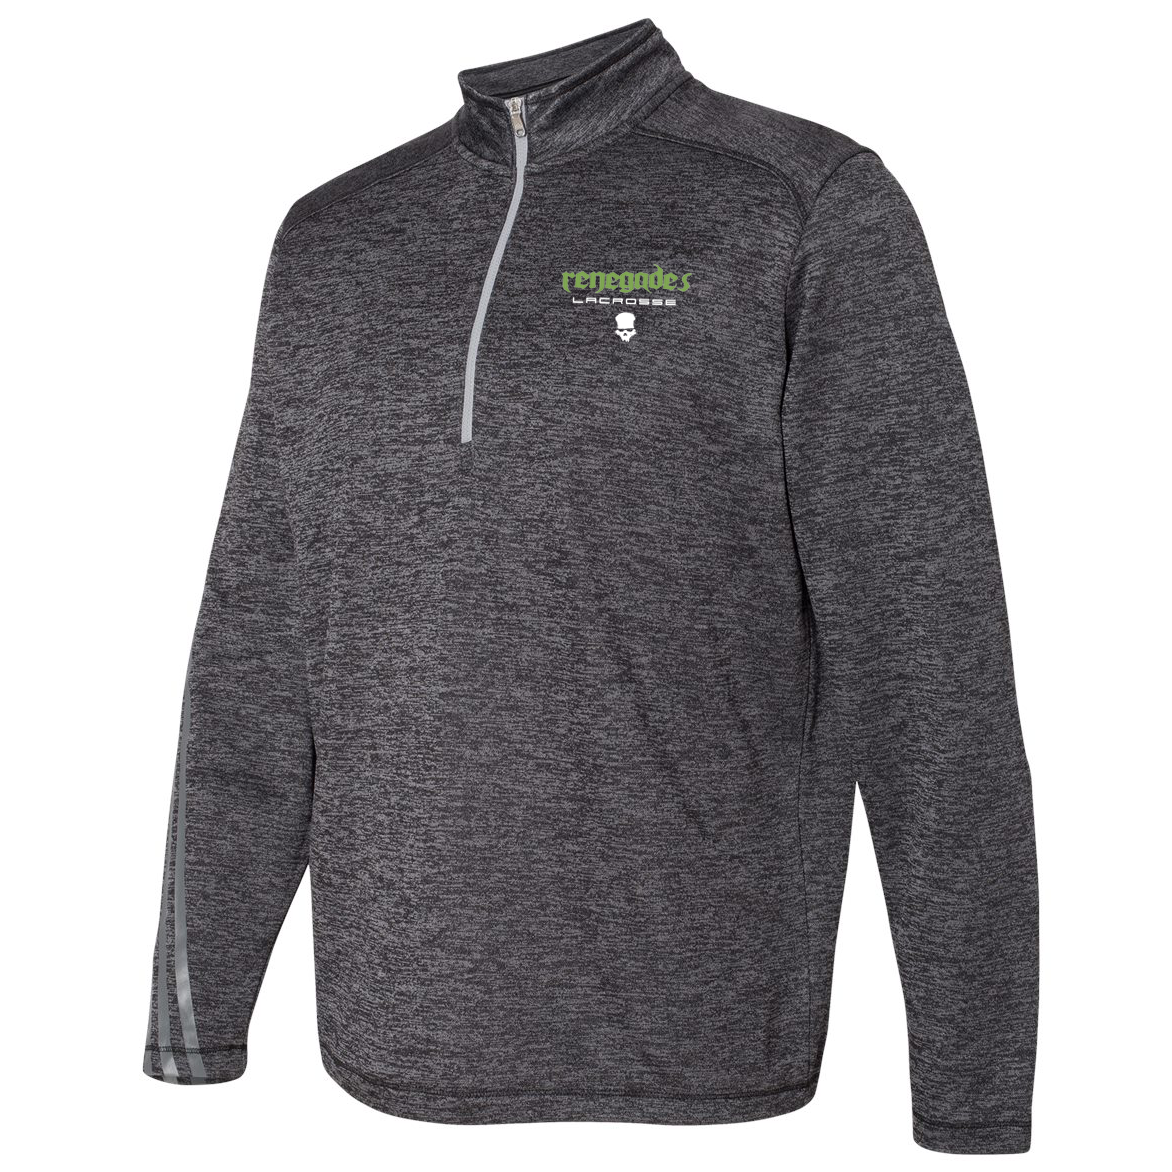 Renegades Lacrosse Adidas Terry Heathered Quarter-Zip Pullover